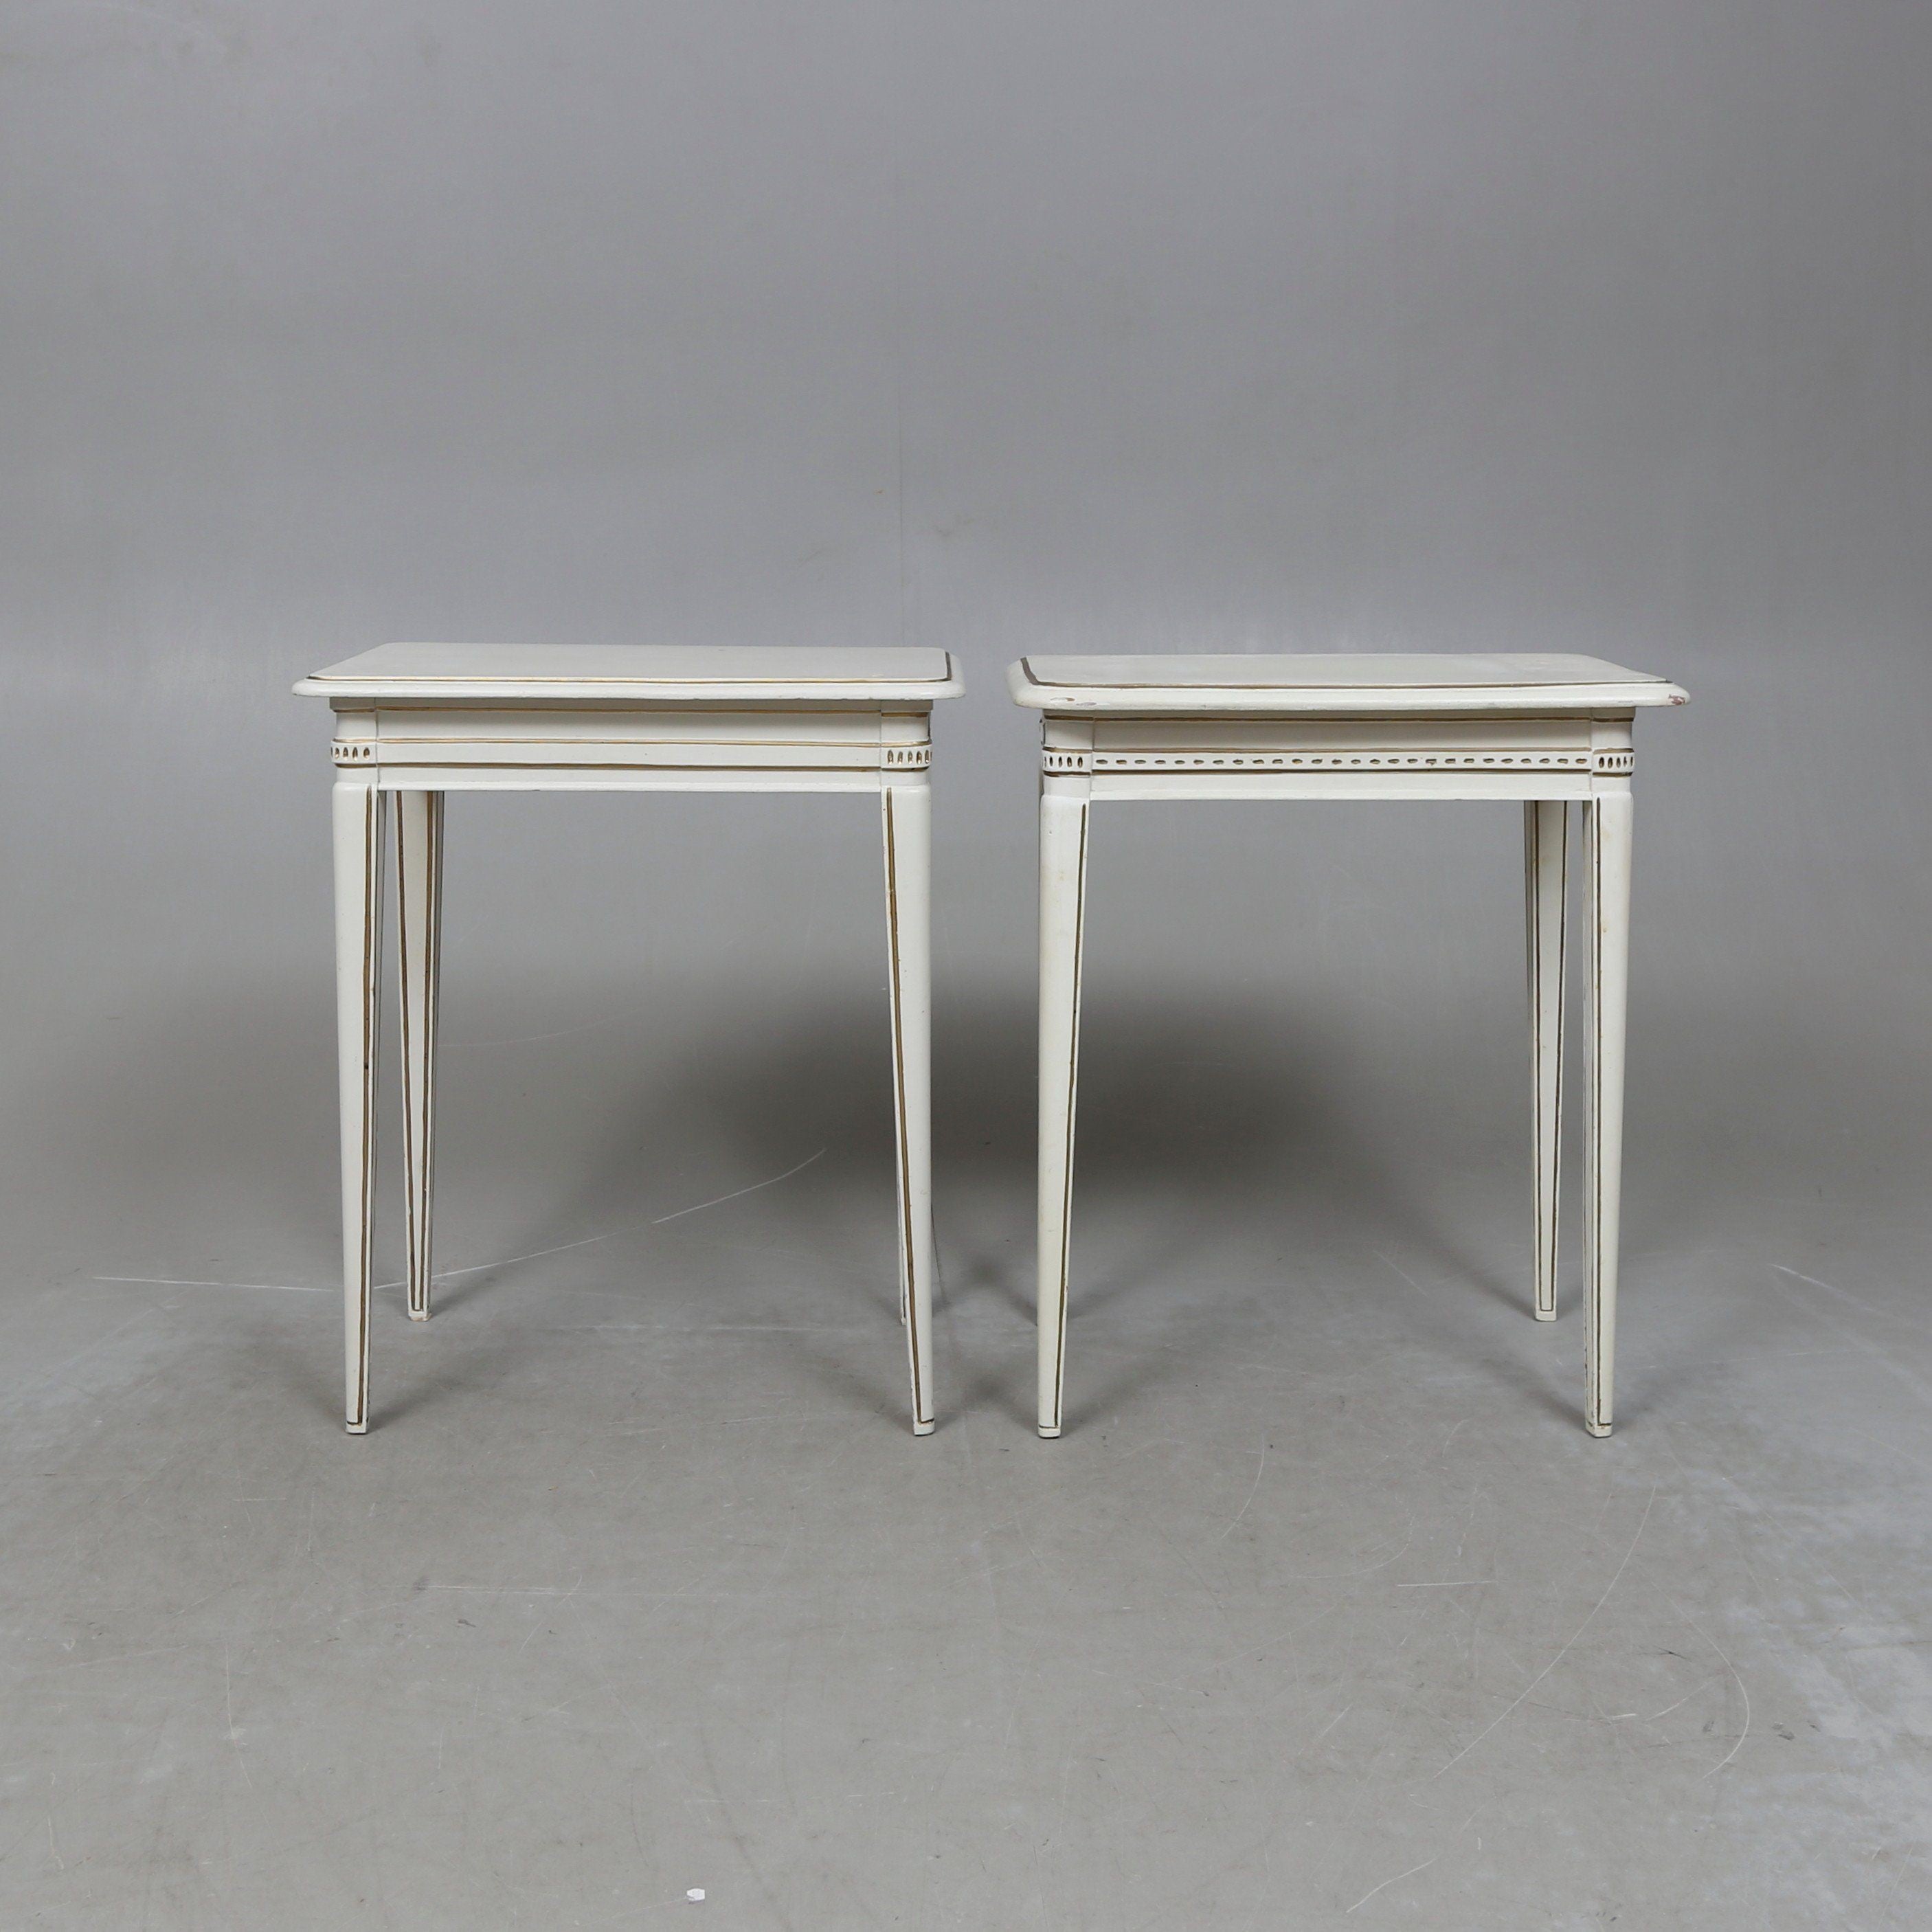 Cream Painted Swedish Gustavian Side Tables with Gilded Carved Detailing, a Pair